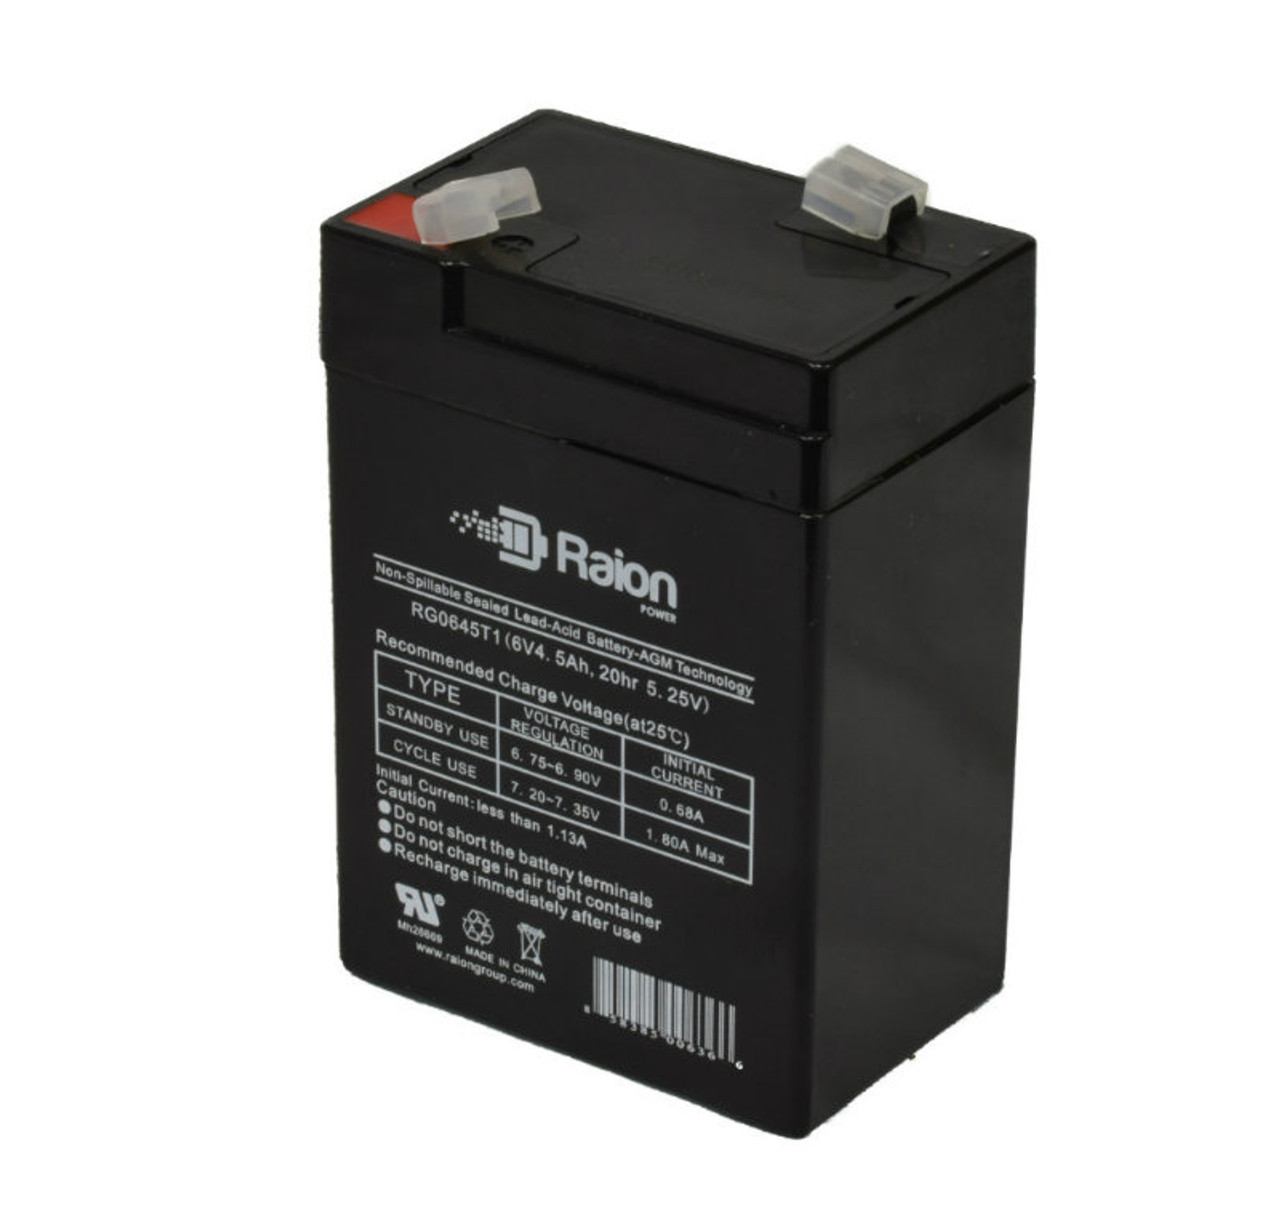 Raion Power RG0645T1 6V 4.5Ah Replacement Battery Cartridge for Mule 730001